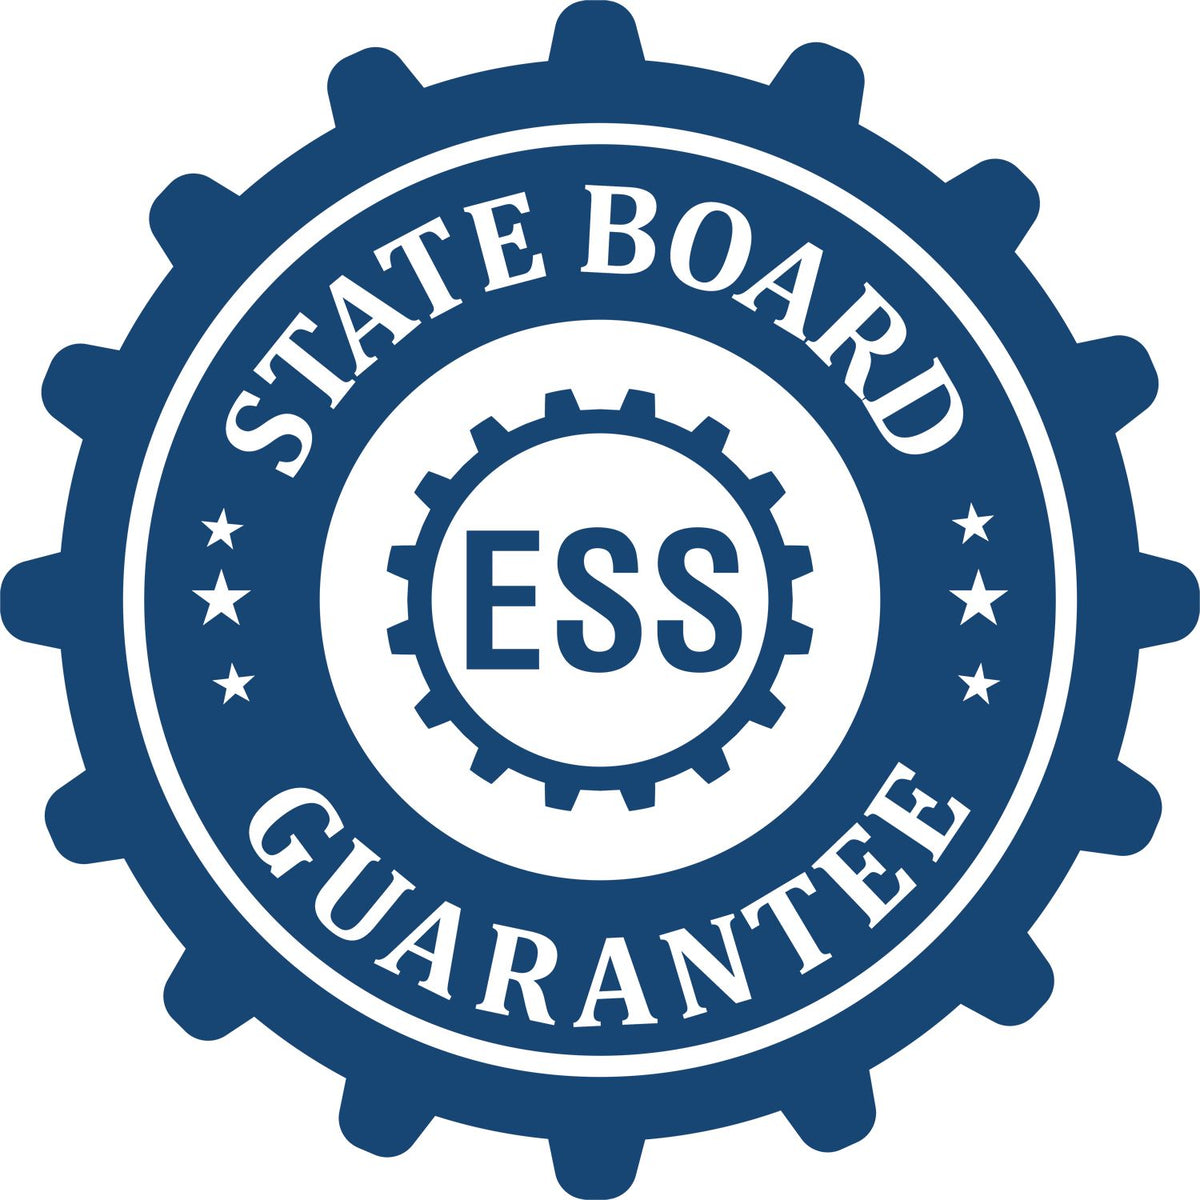 An emblem in a gear shape illustrating a state board guarantee for the Nevada Desk Architect Embossing Seal product.